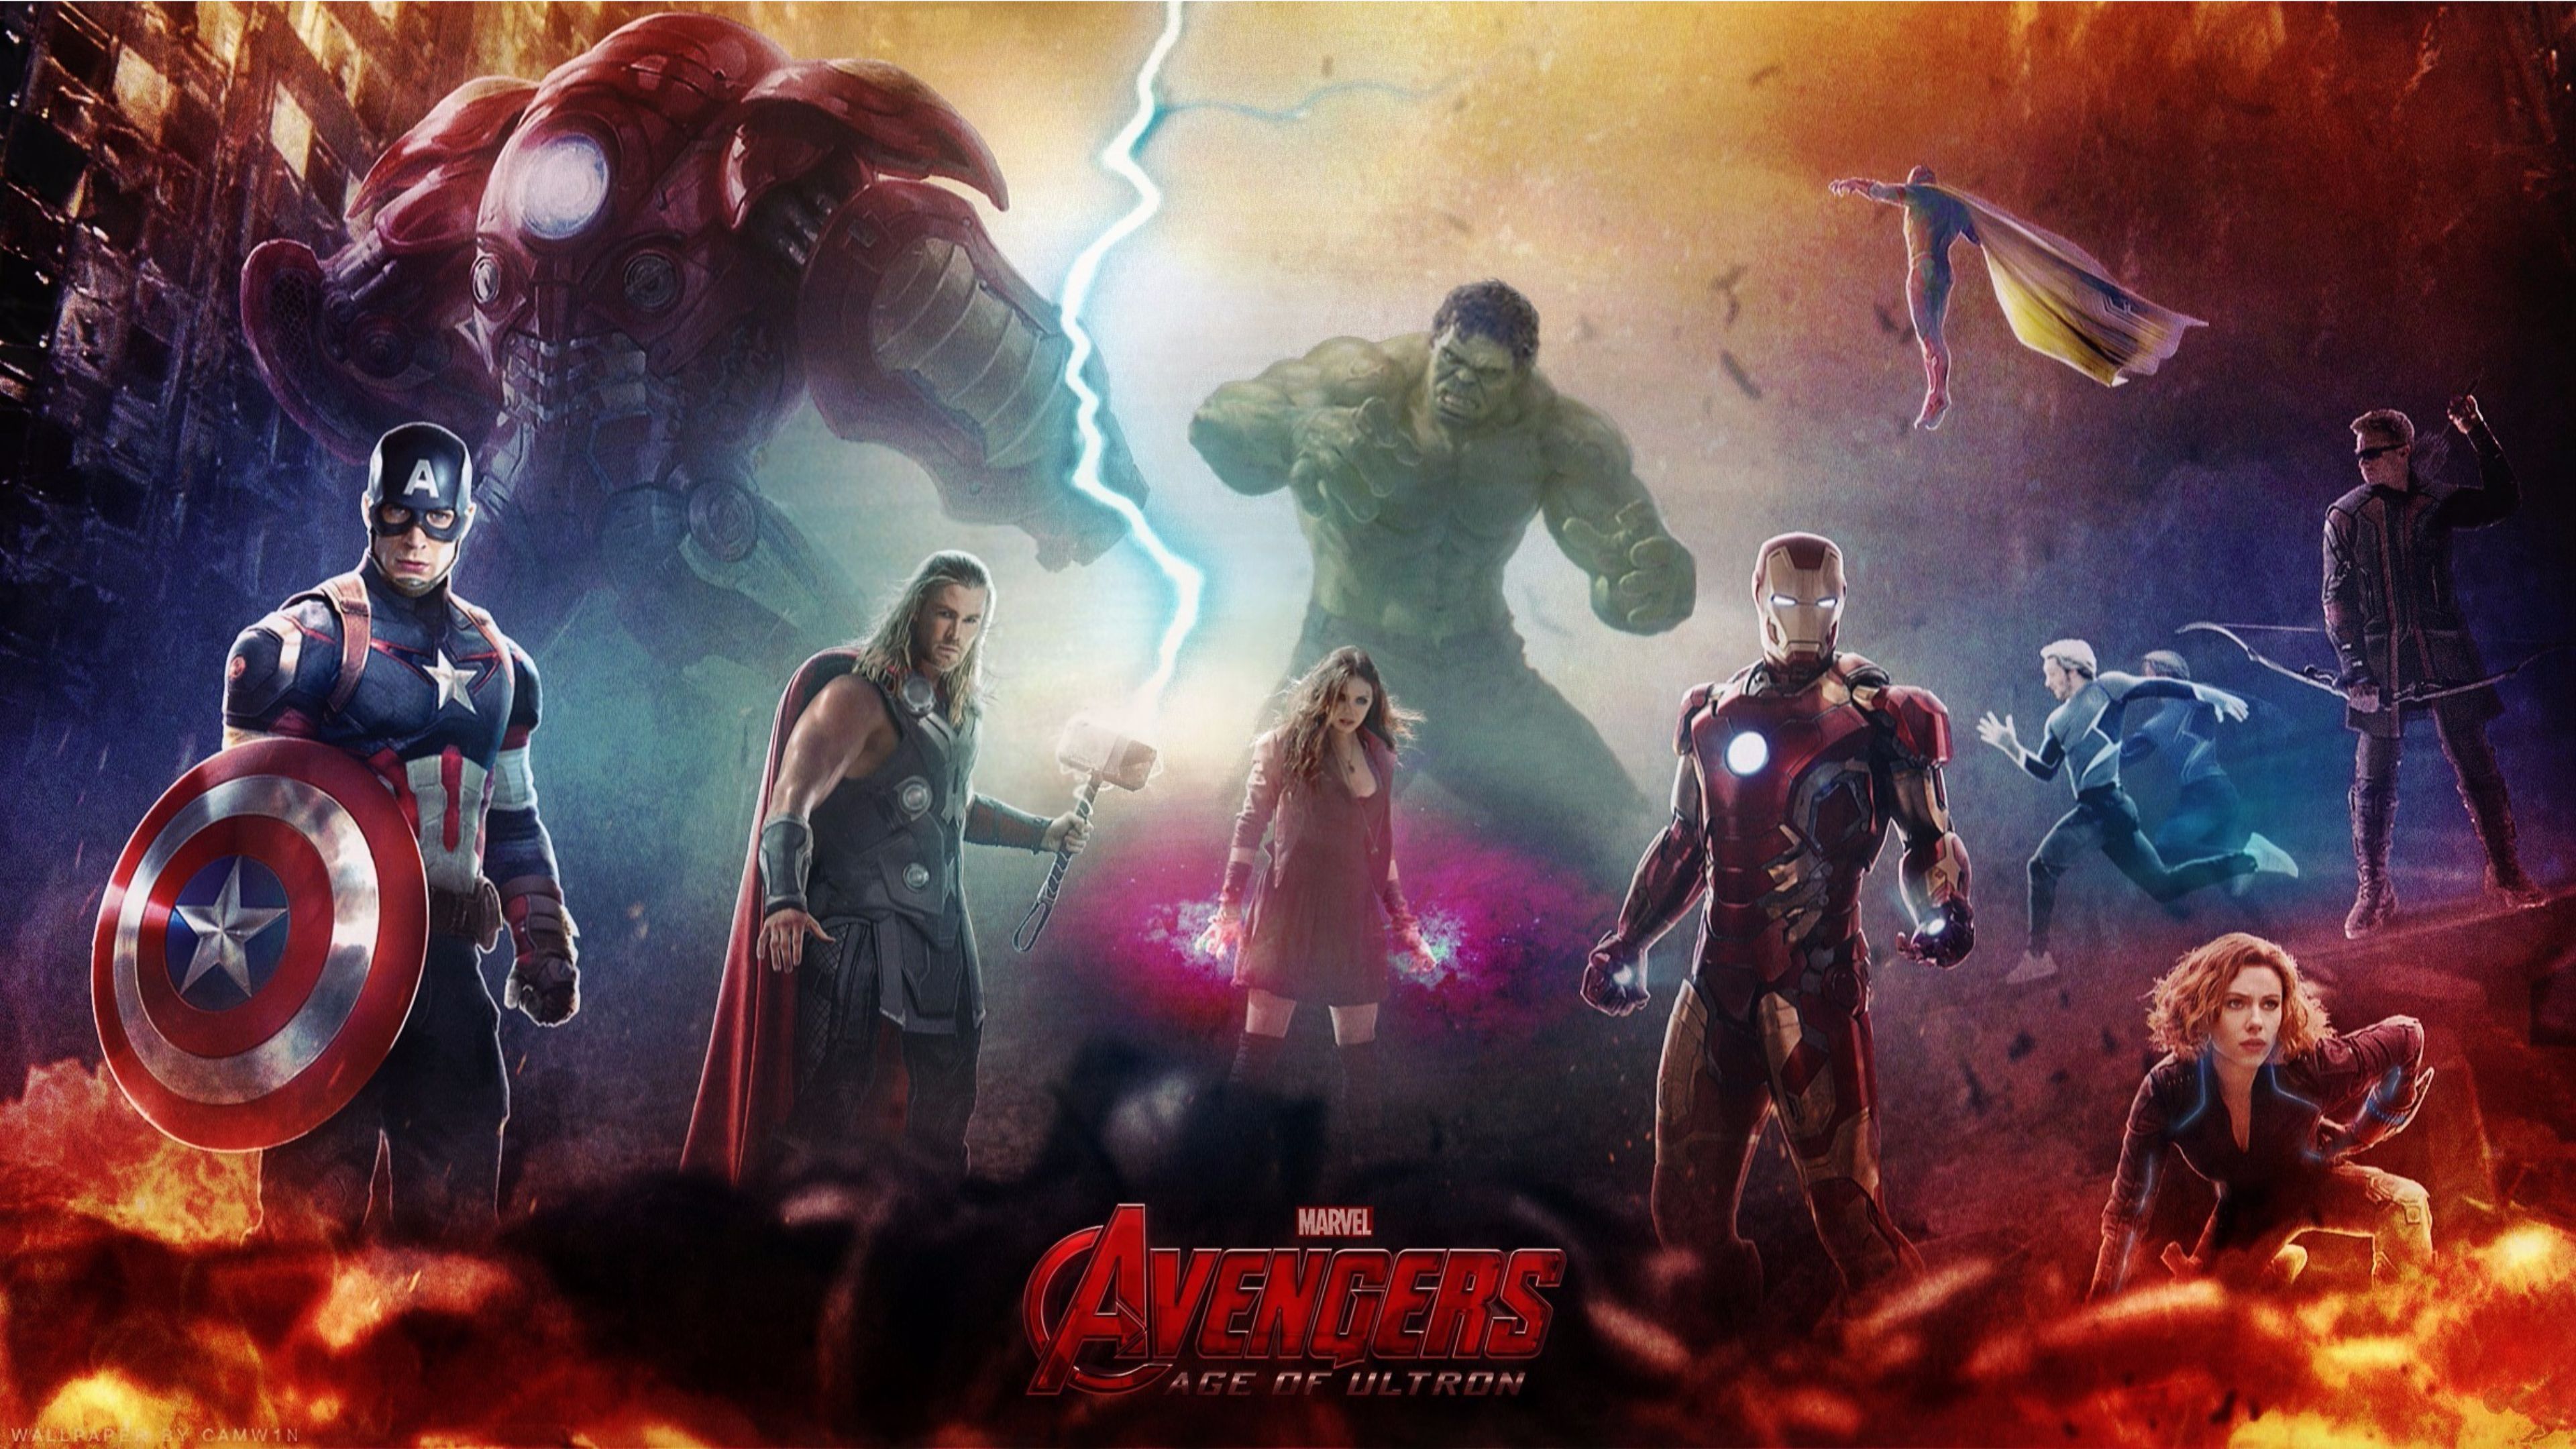 Avengers 4K wallpaper for your desktop or mobile screen free and easy to download